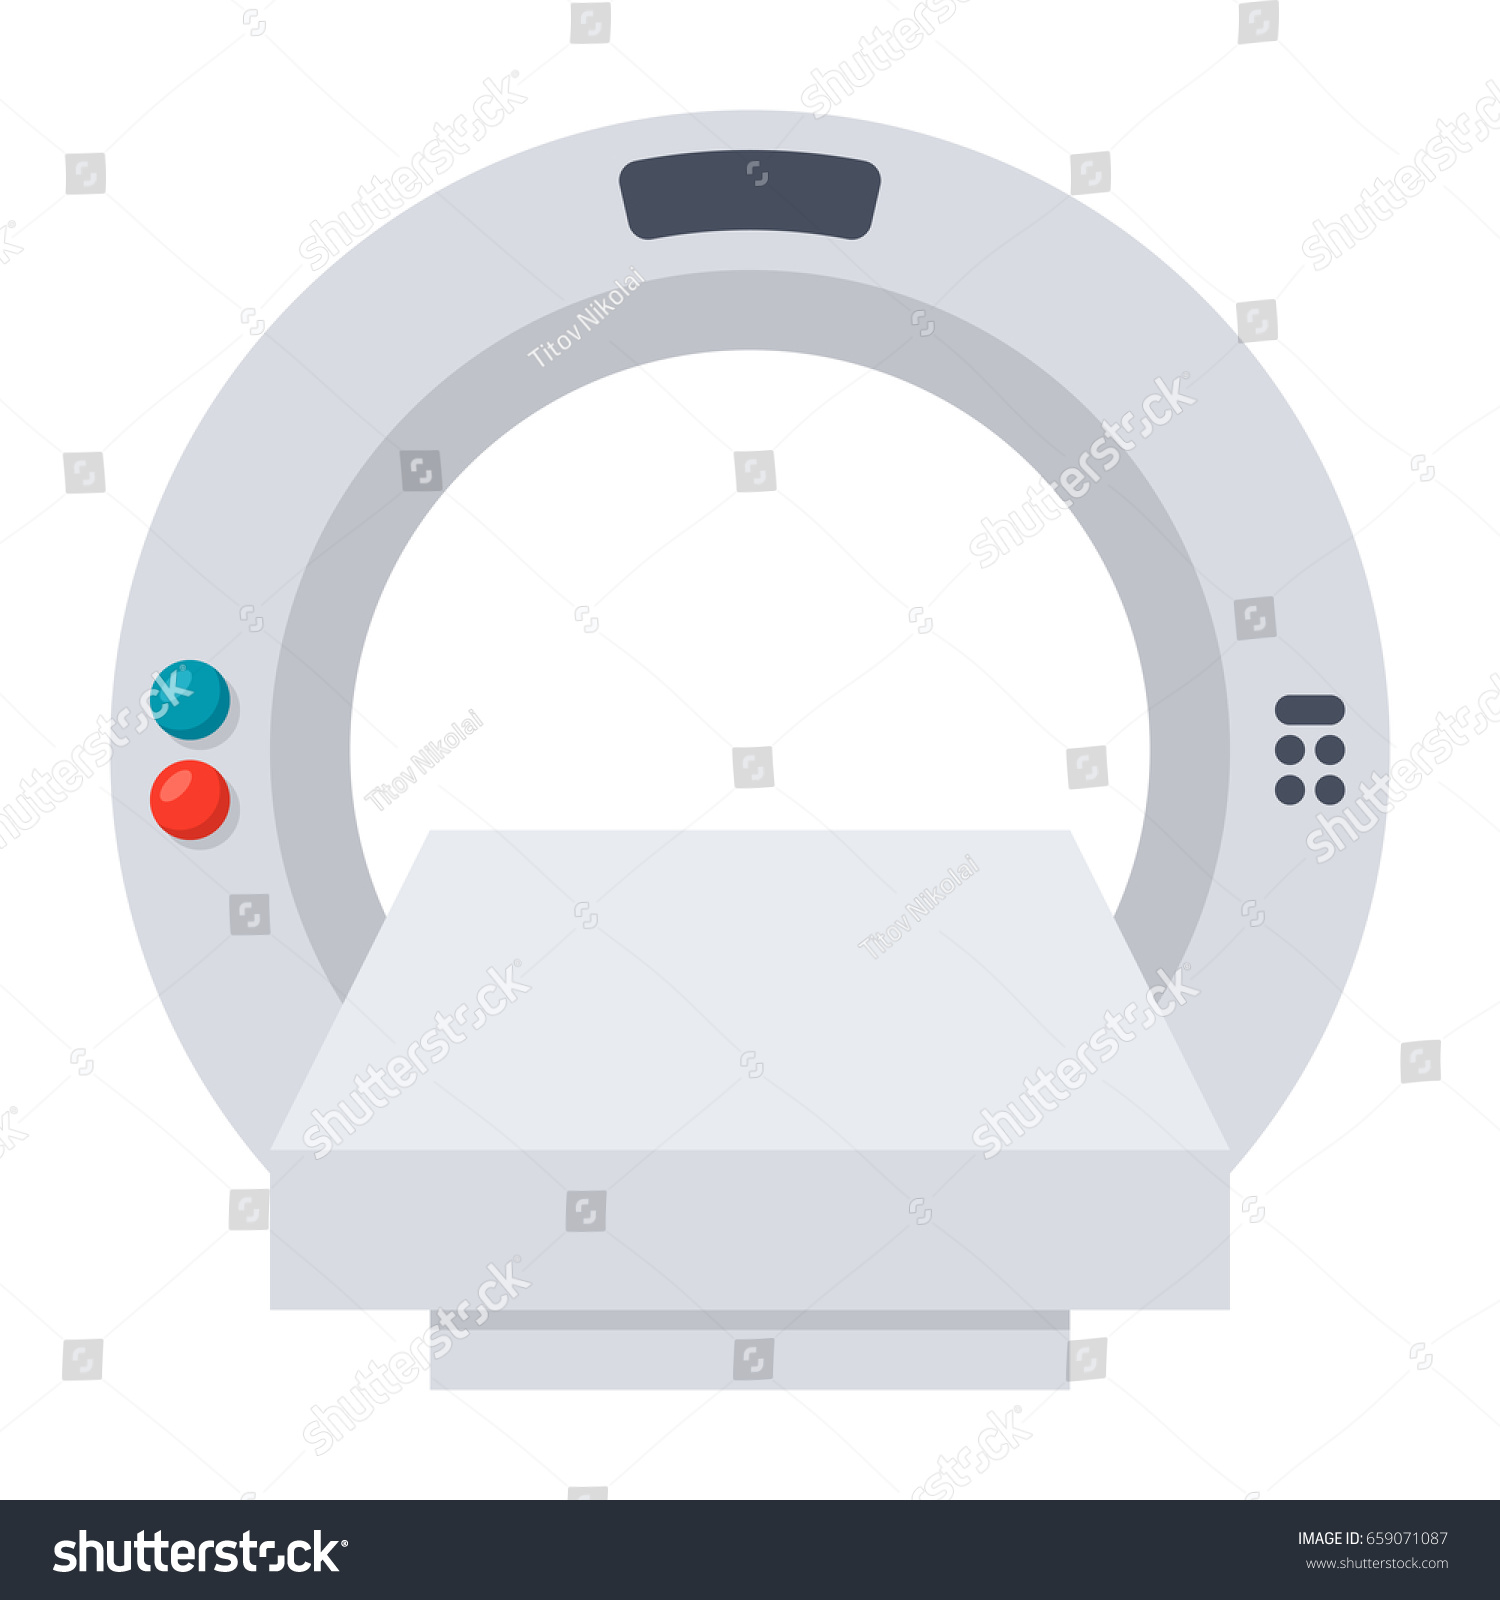 SVG of Computed tomography concept with magnetic resonance imaging scanner, vector illustration in flat style svg